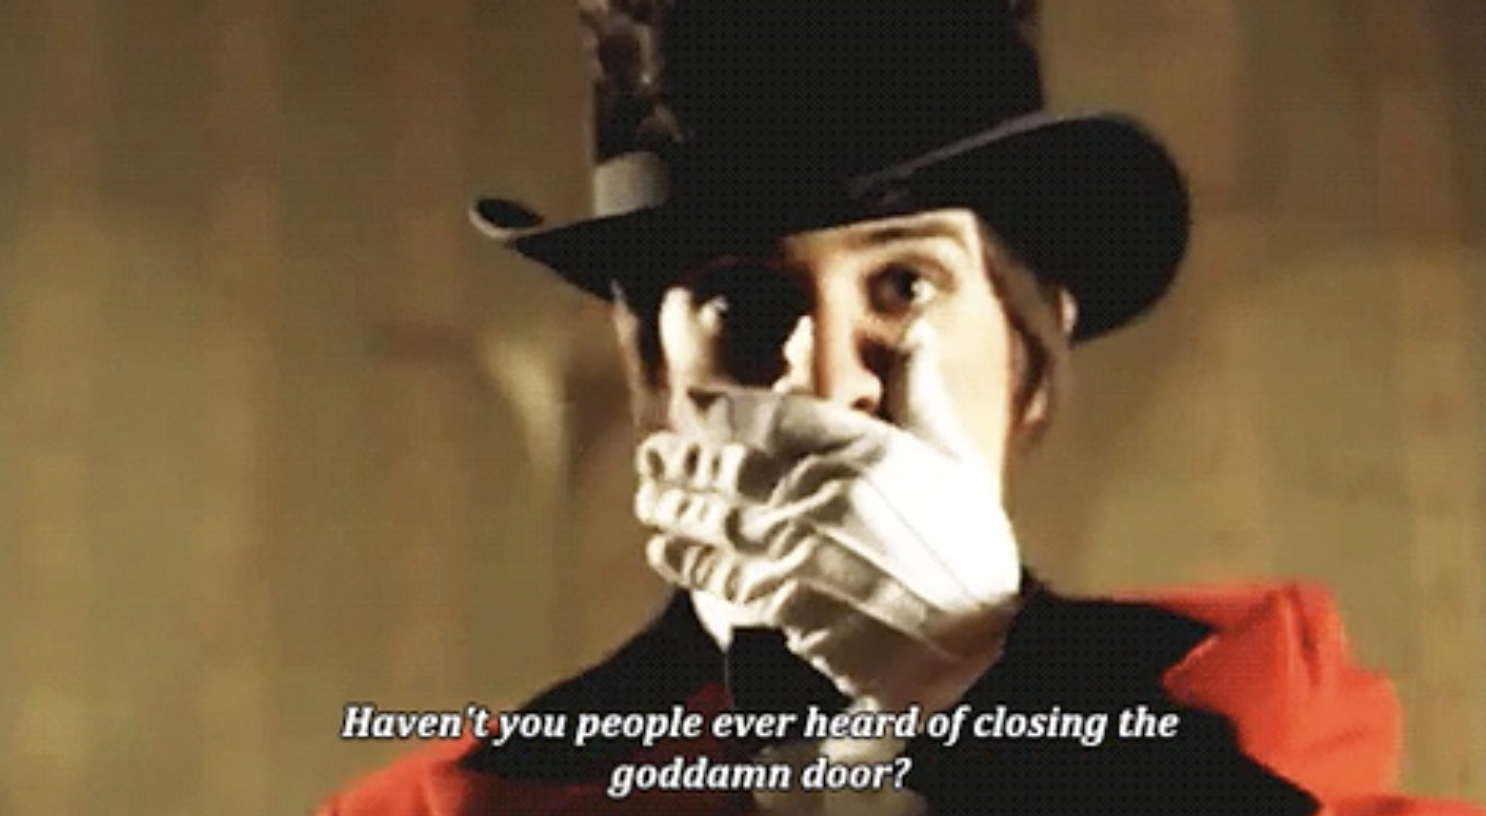 Brendon urie covering his mouth with the text &quot;Haven&#x27;t you people ever heard of closing the goddamn door?&quot;